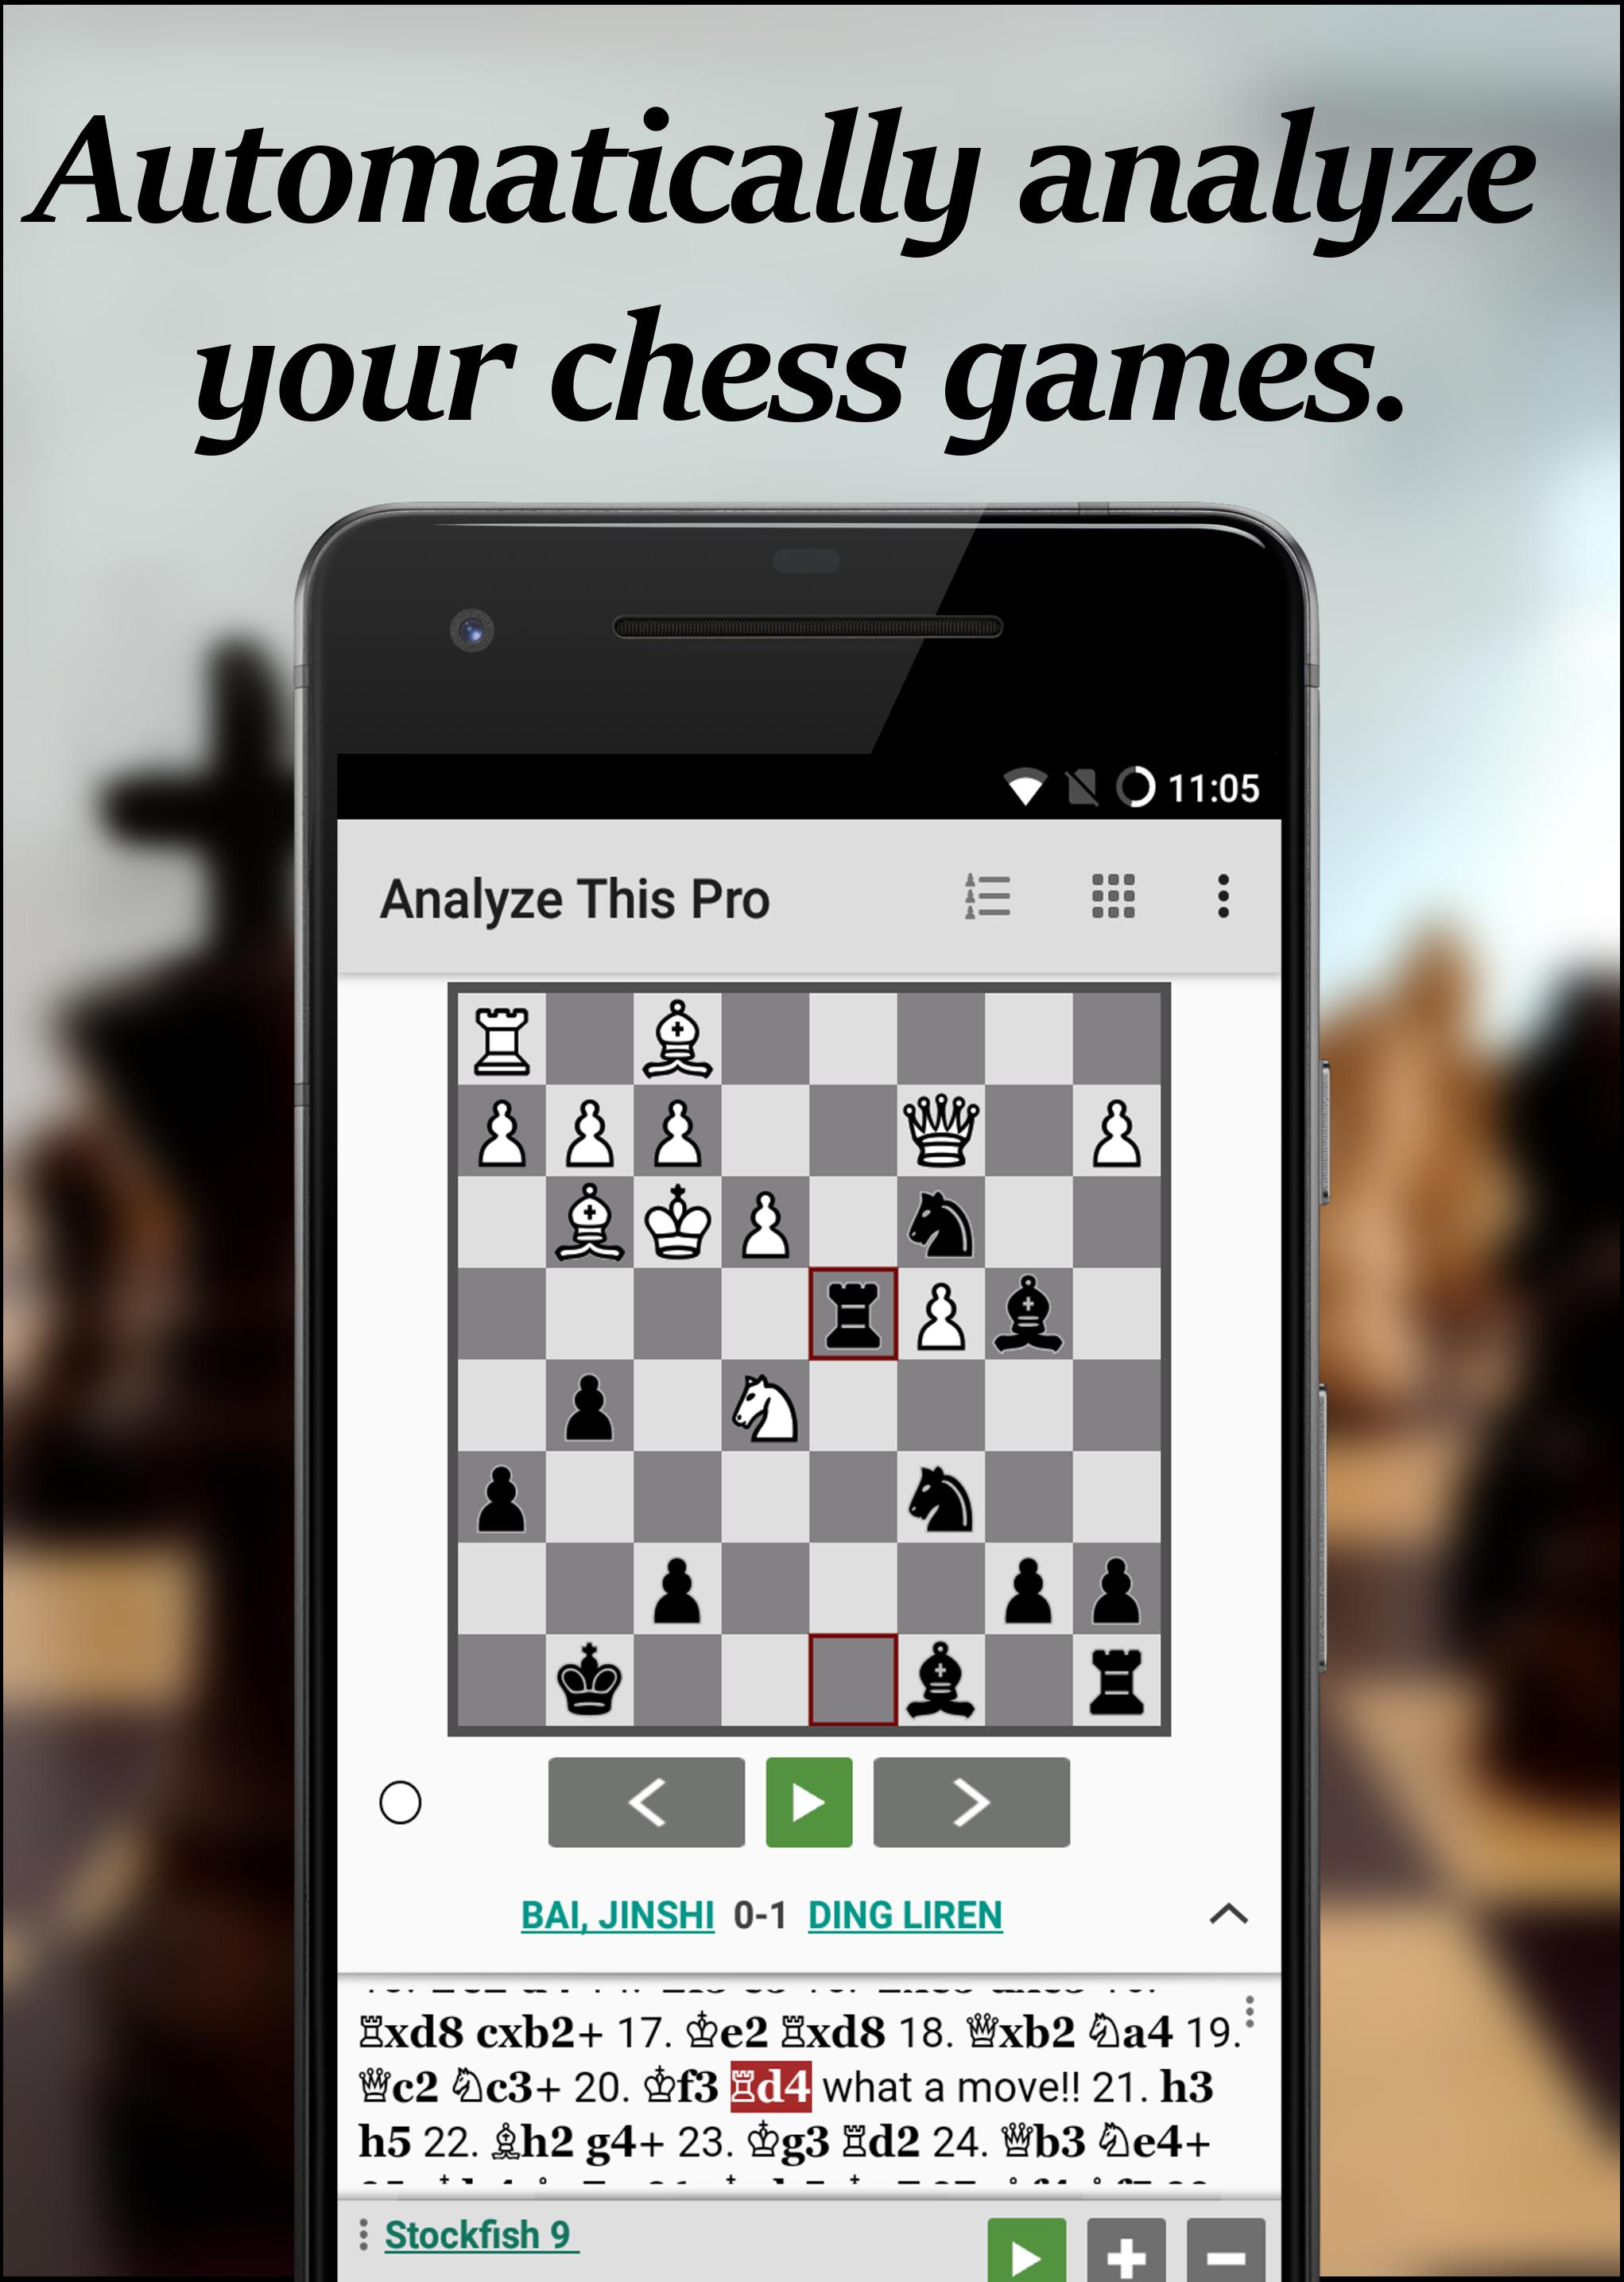 What's new in Follow Chess App!? - MyChessApps